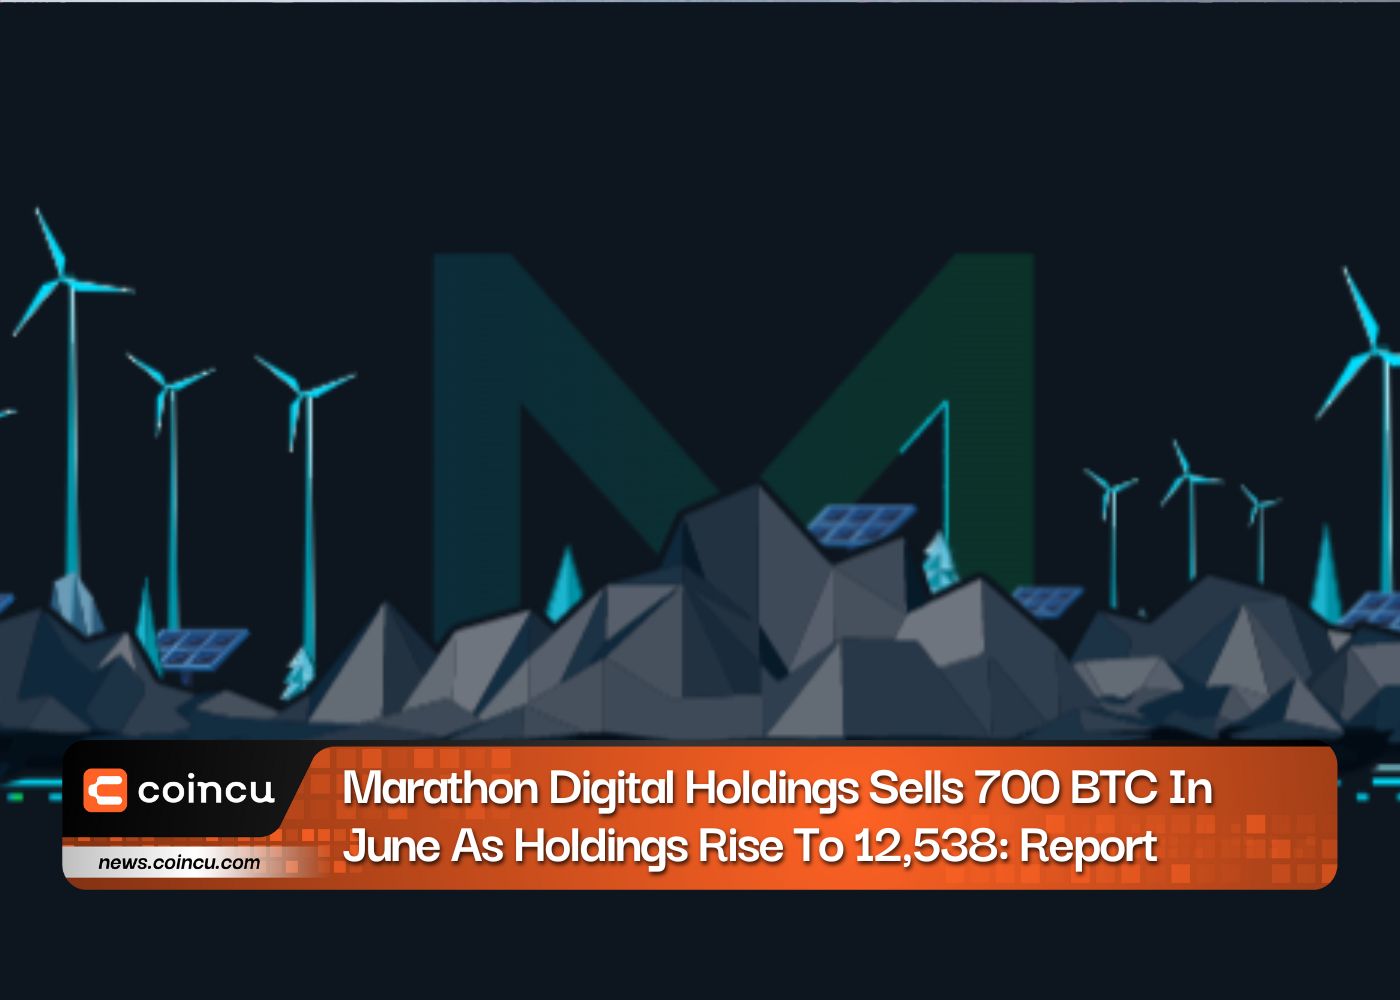 Marathon Digital Holdings Sells 700 BTC In June As Holdings Rise To 12,538: Report